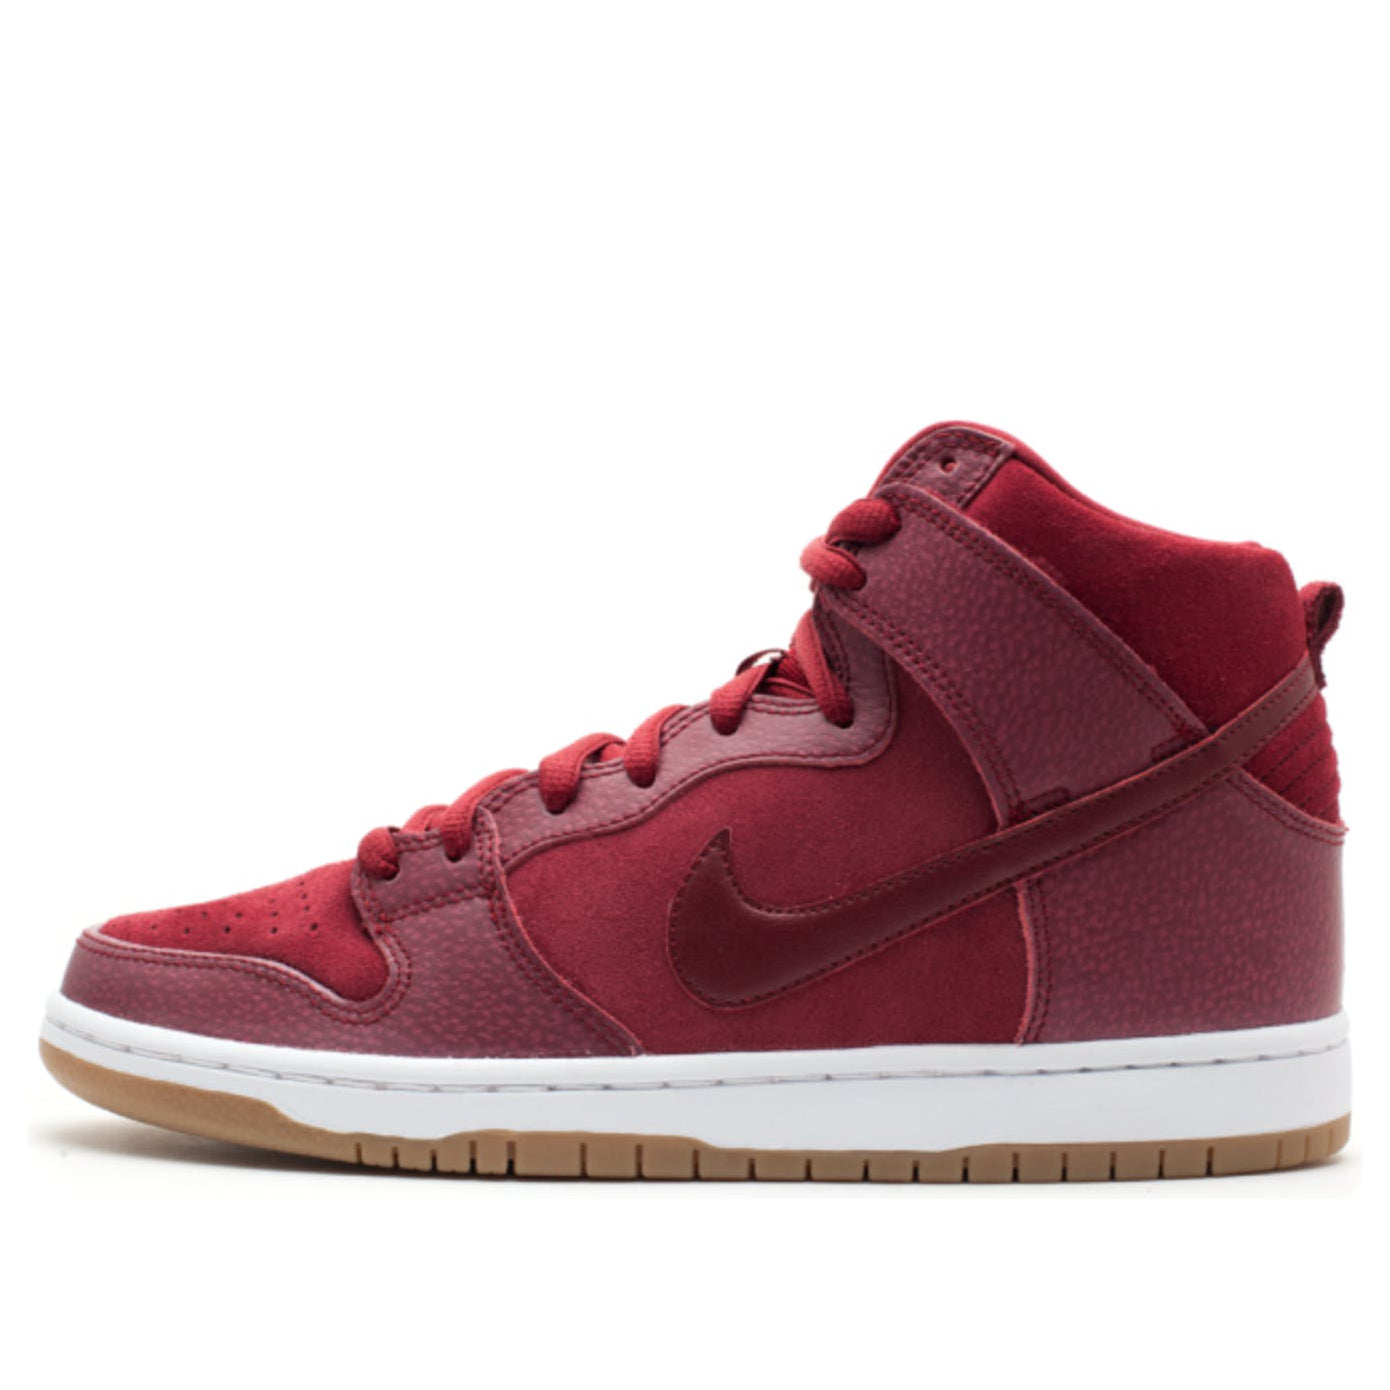 Nike Dunk High Pro Sb 'Red Maroon' 305050-662 Classic Sneakers - Click Image to Close